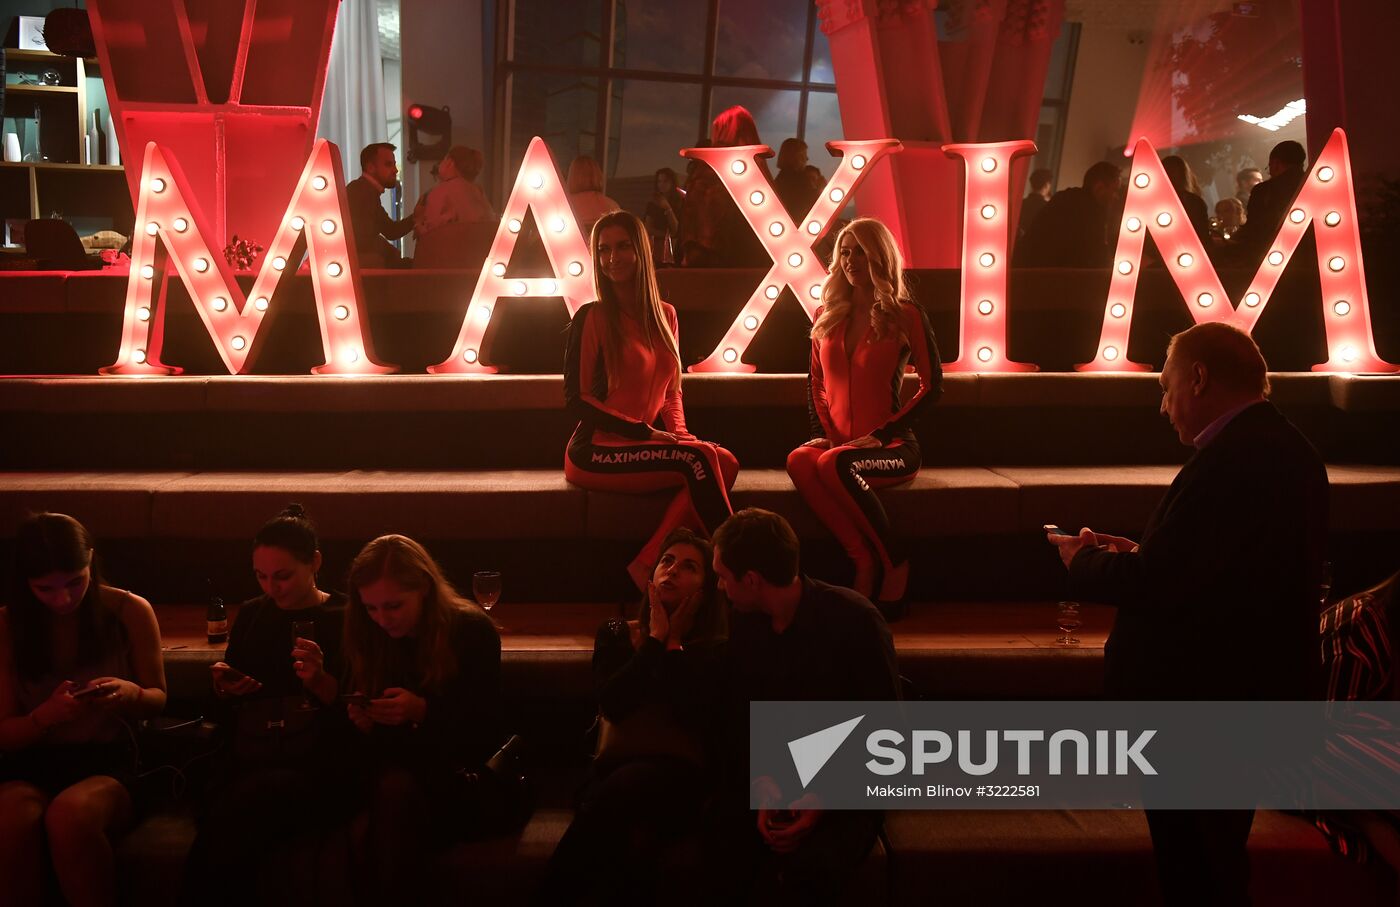 Party to mark Maxim Hot 100 list of Russia's sexiest women